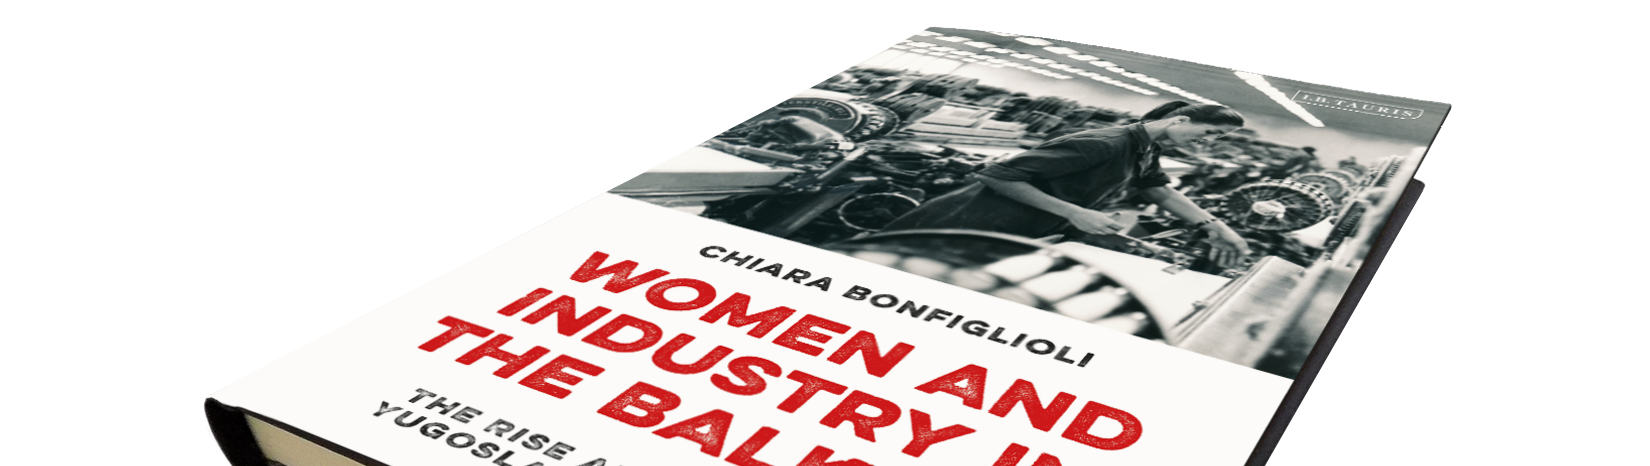 book-image-women-and-industry-in-the-balkan